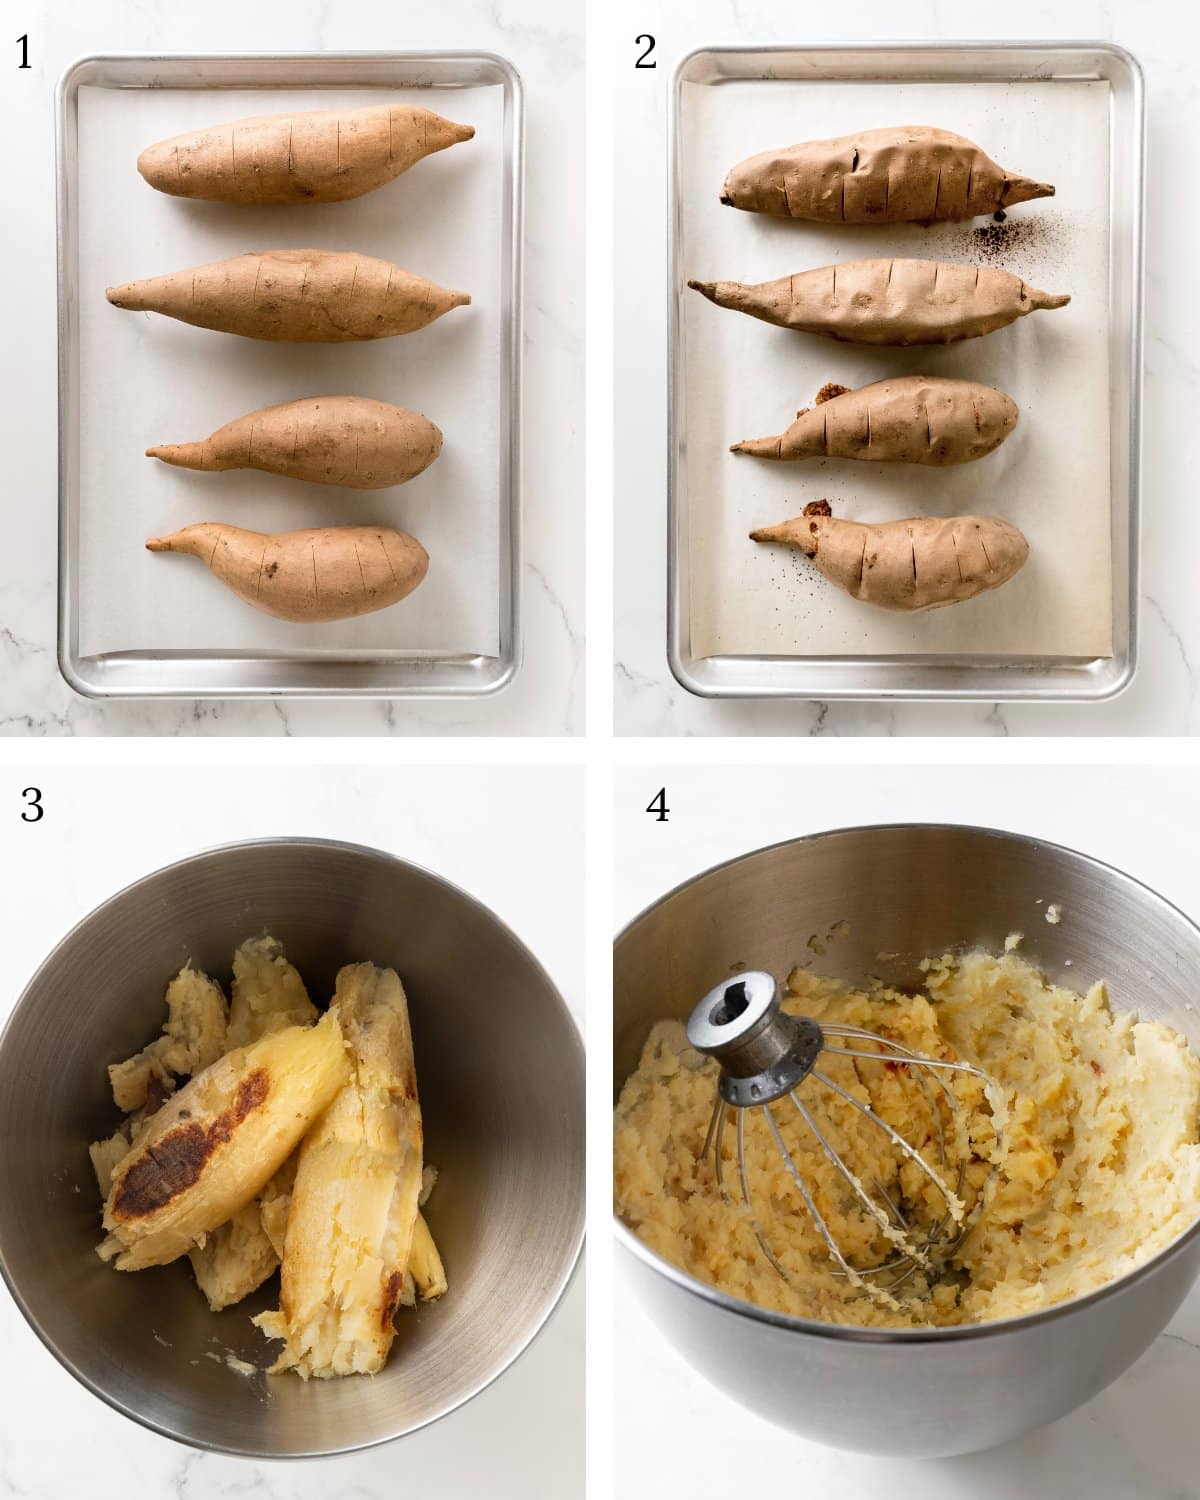 A step by step guide of instructions for mashed white sweet potatoes. Four potatoes are shown on a silver baking tray, with a second photo showing the potatoes roasted. Third photo shows the potatoes peeled in a metal mixing bowl, and the fourth photo shows the potato mixture with a whisk attachment.